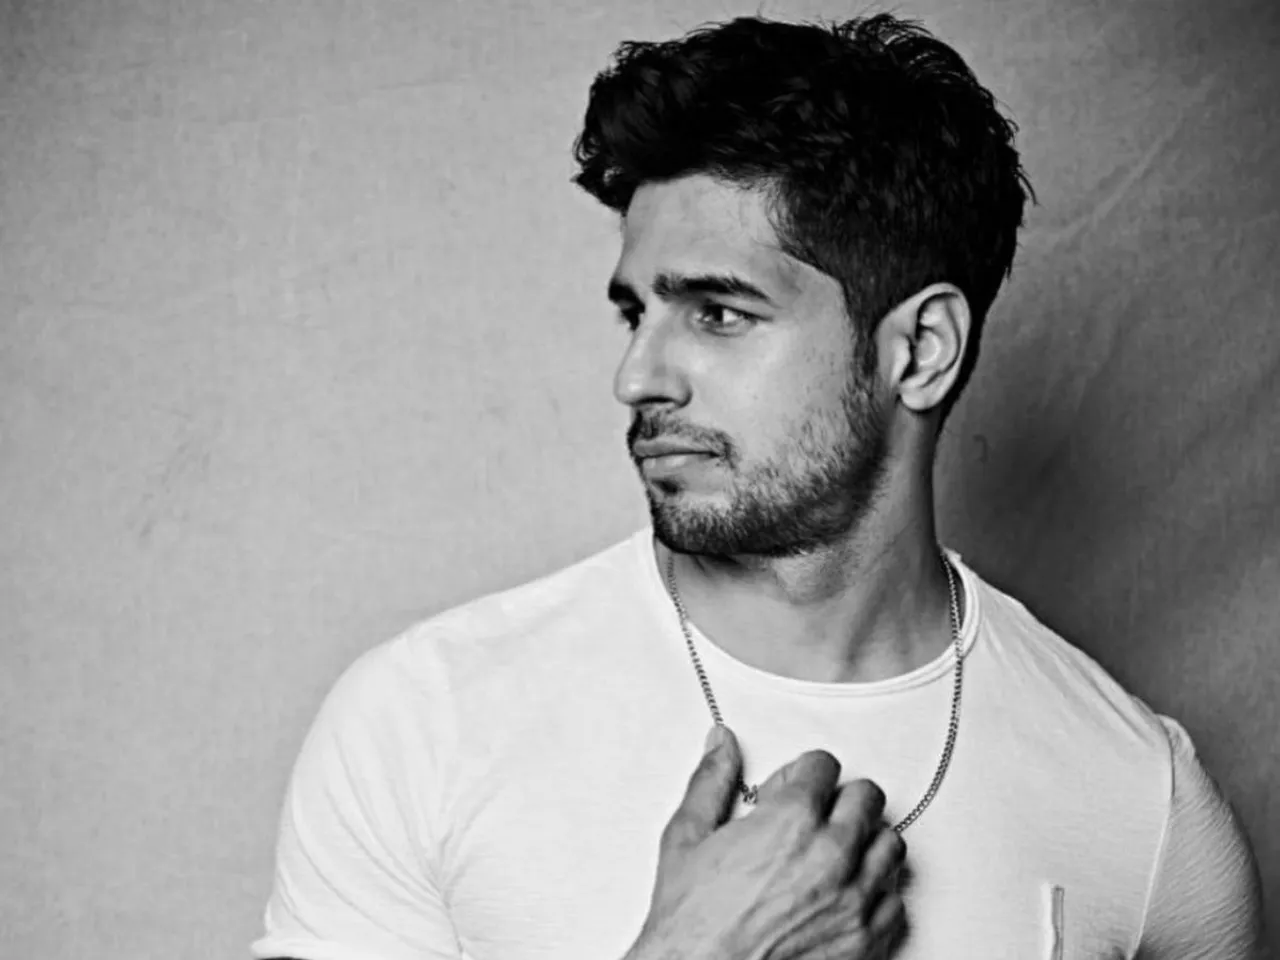 Intention is to make cinema that's remembered: Sidharth Malhotra